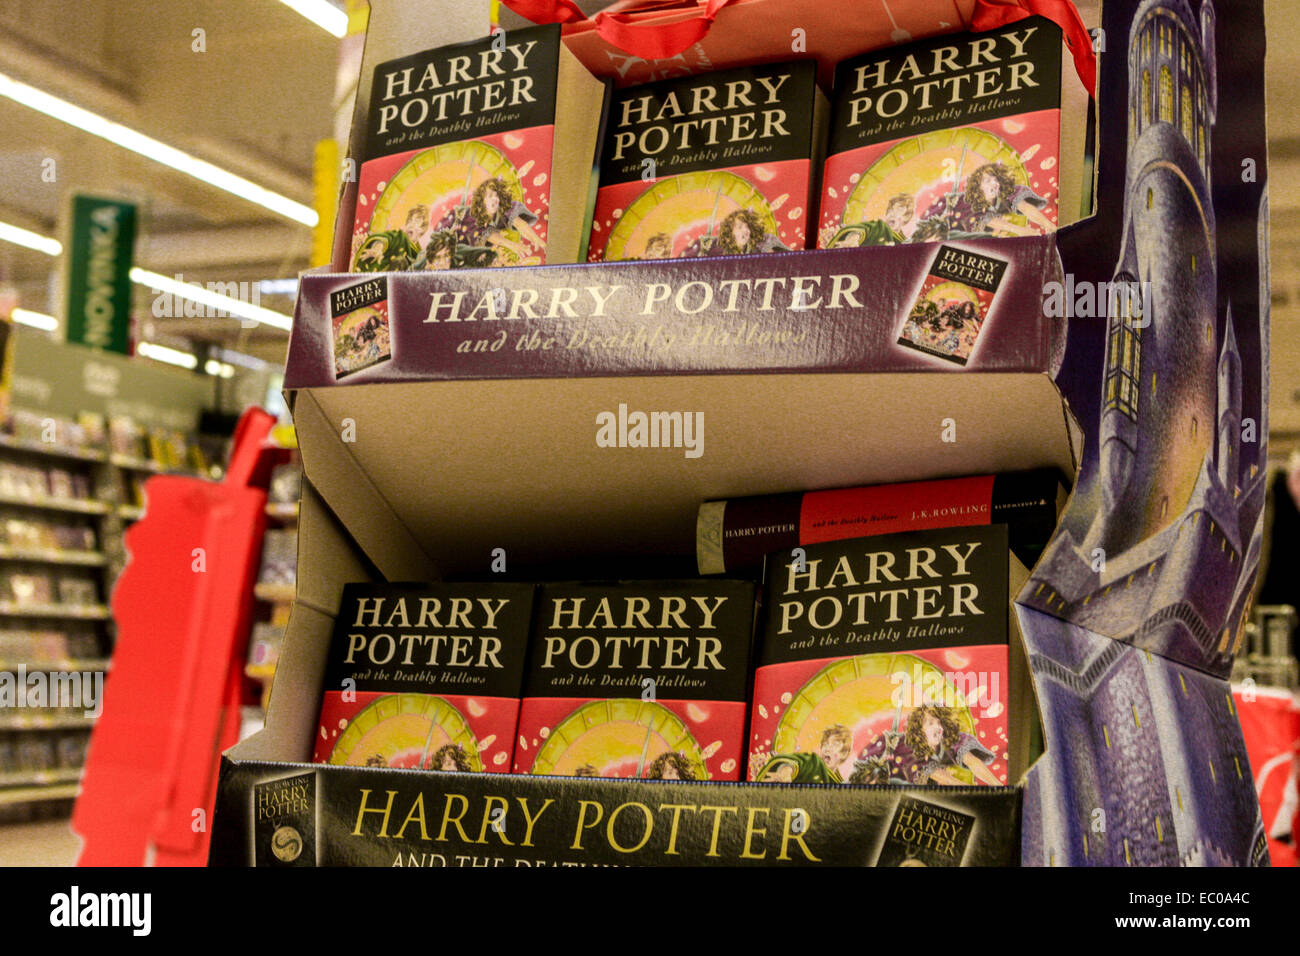 Harry Potter books Deathly hallows sale in the supermarket Stock Photo